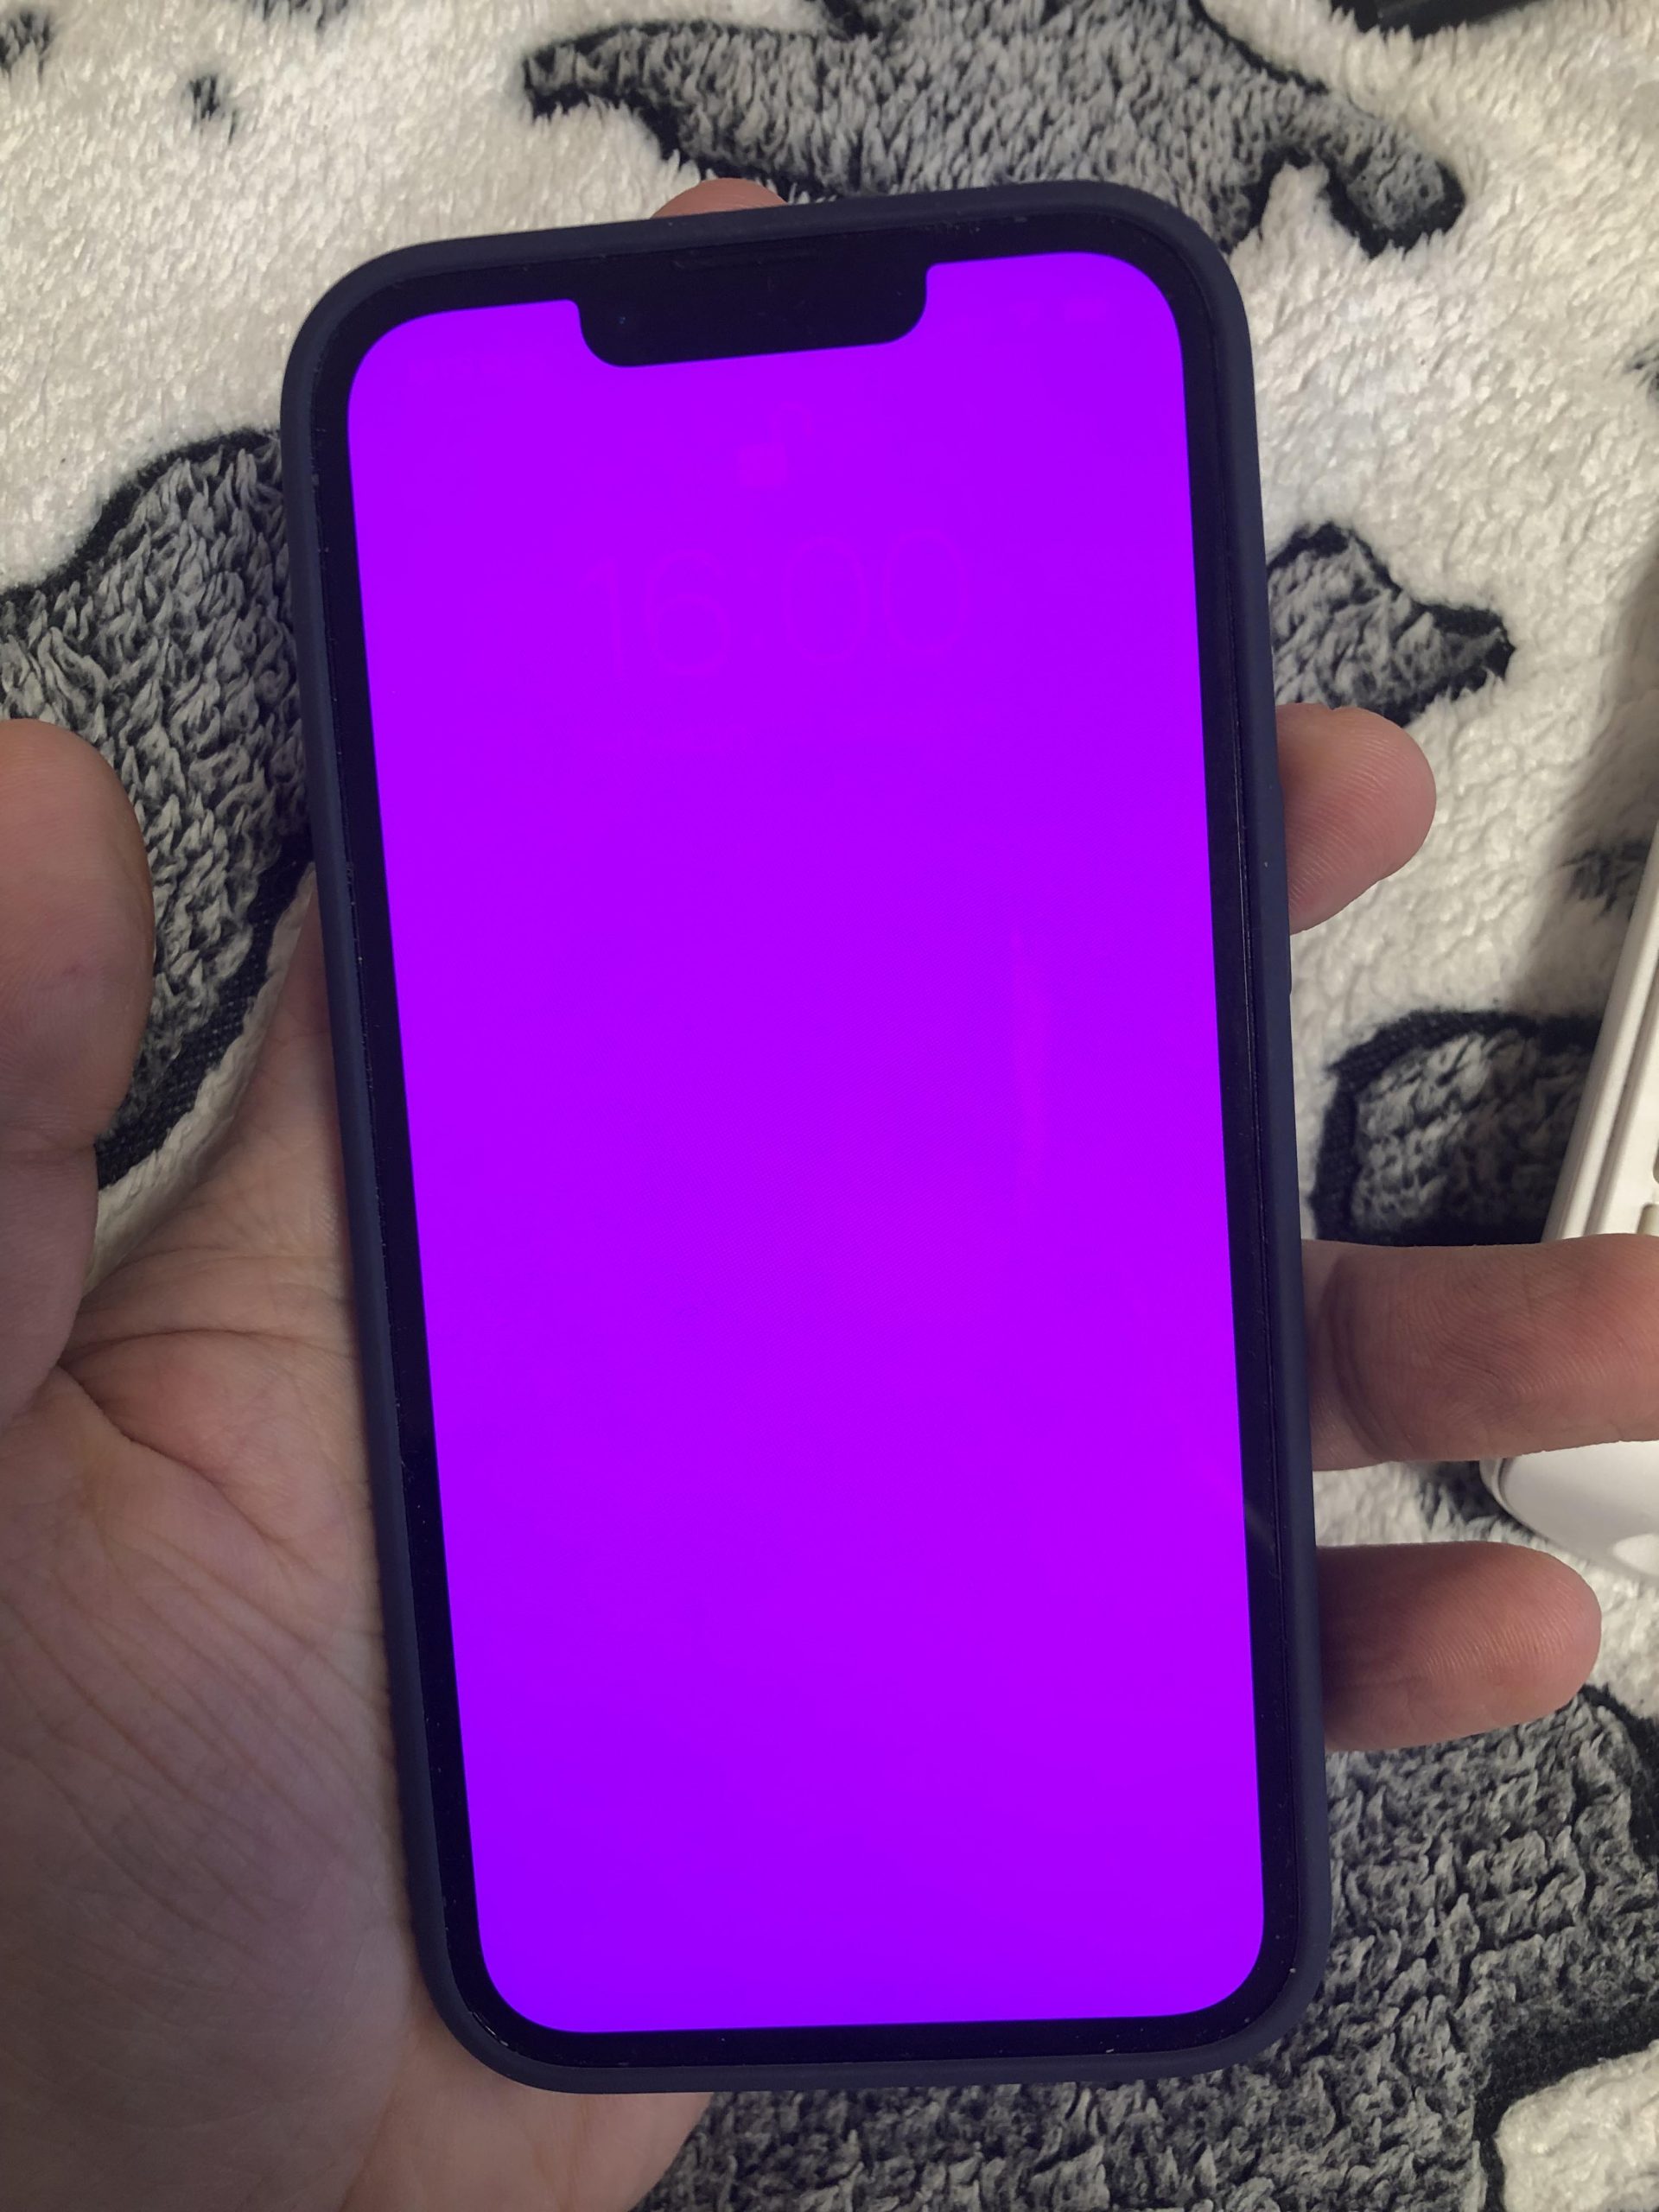 What can be the reason if my phone screen is turning purple